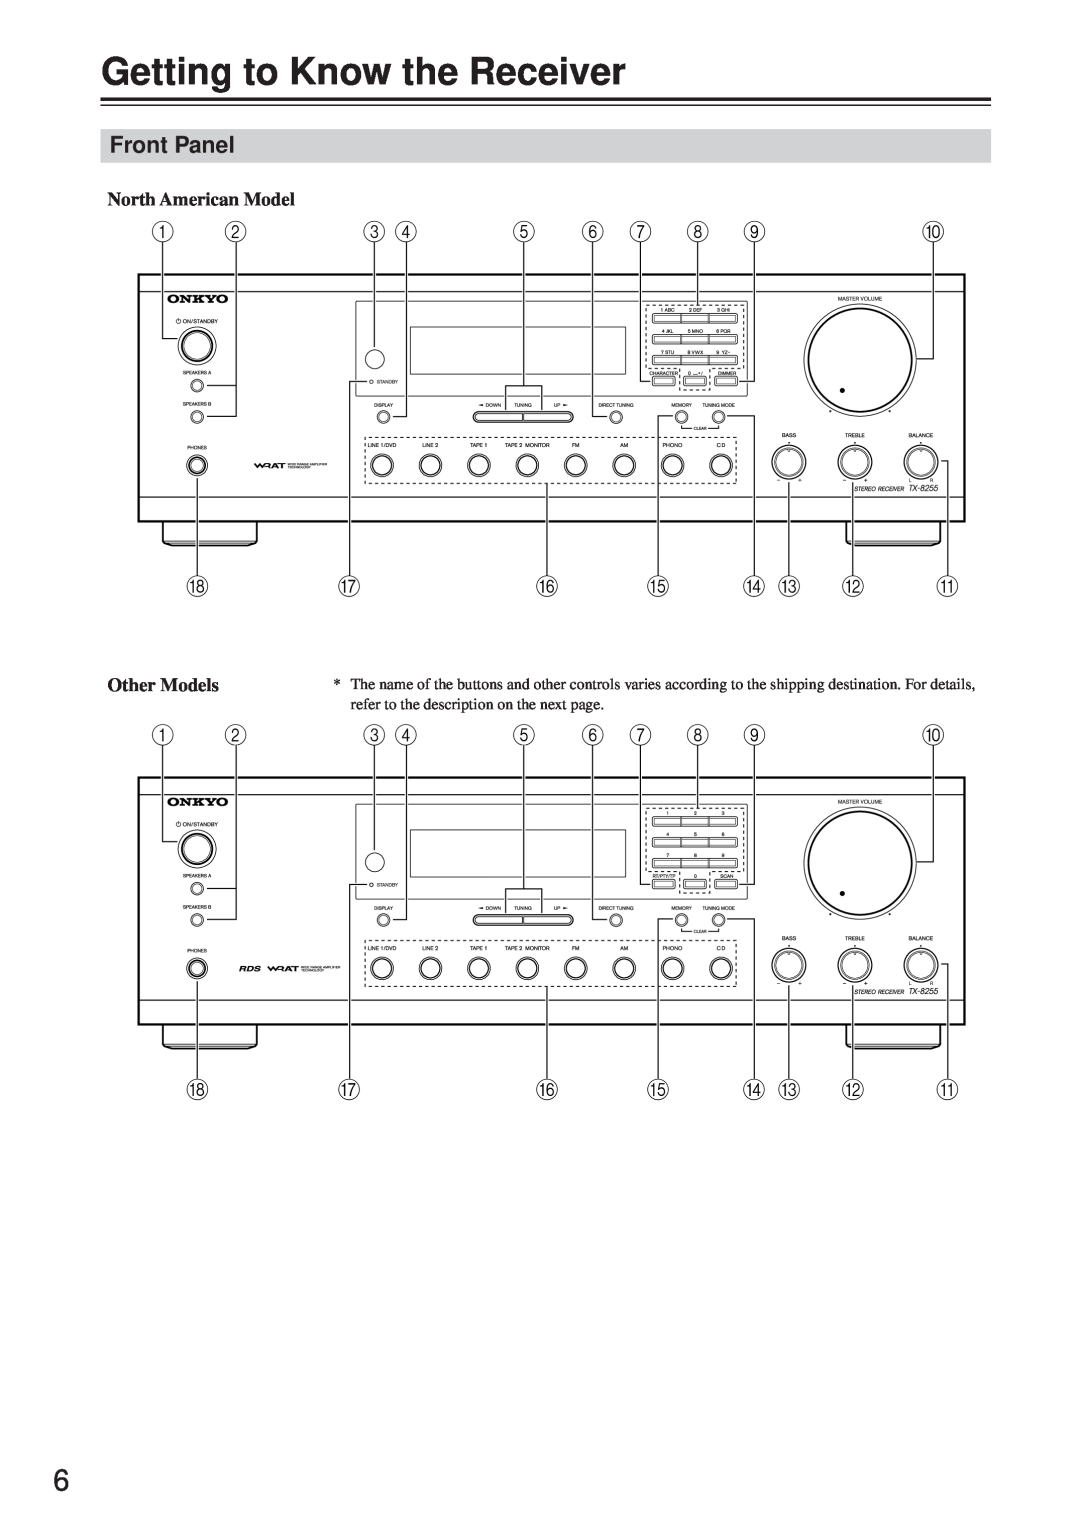 Onkyo TX-8255 instruction manual Getting to Know the Receiver, Front Panel 